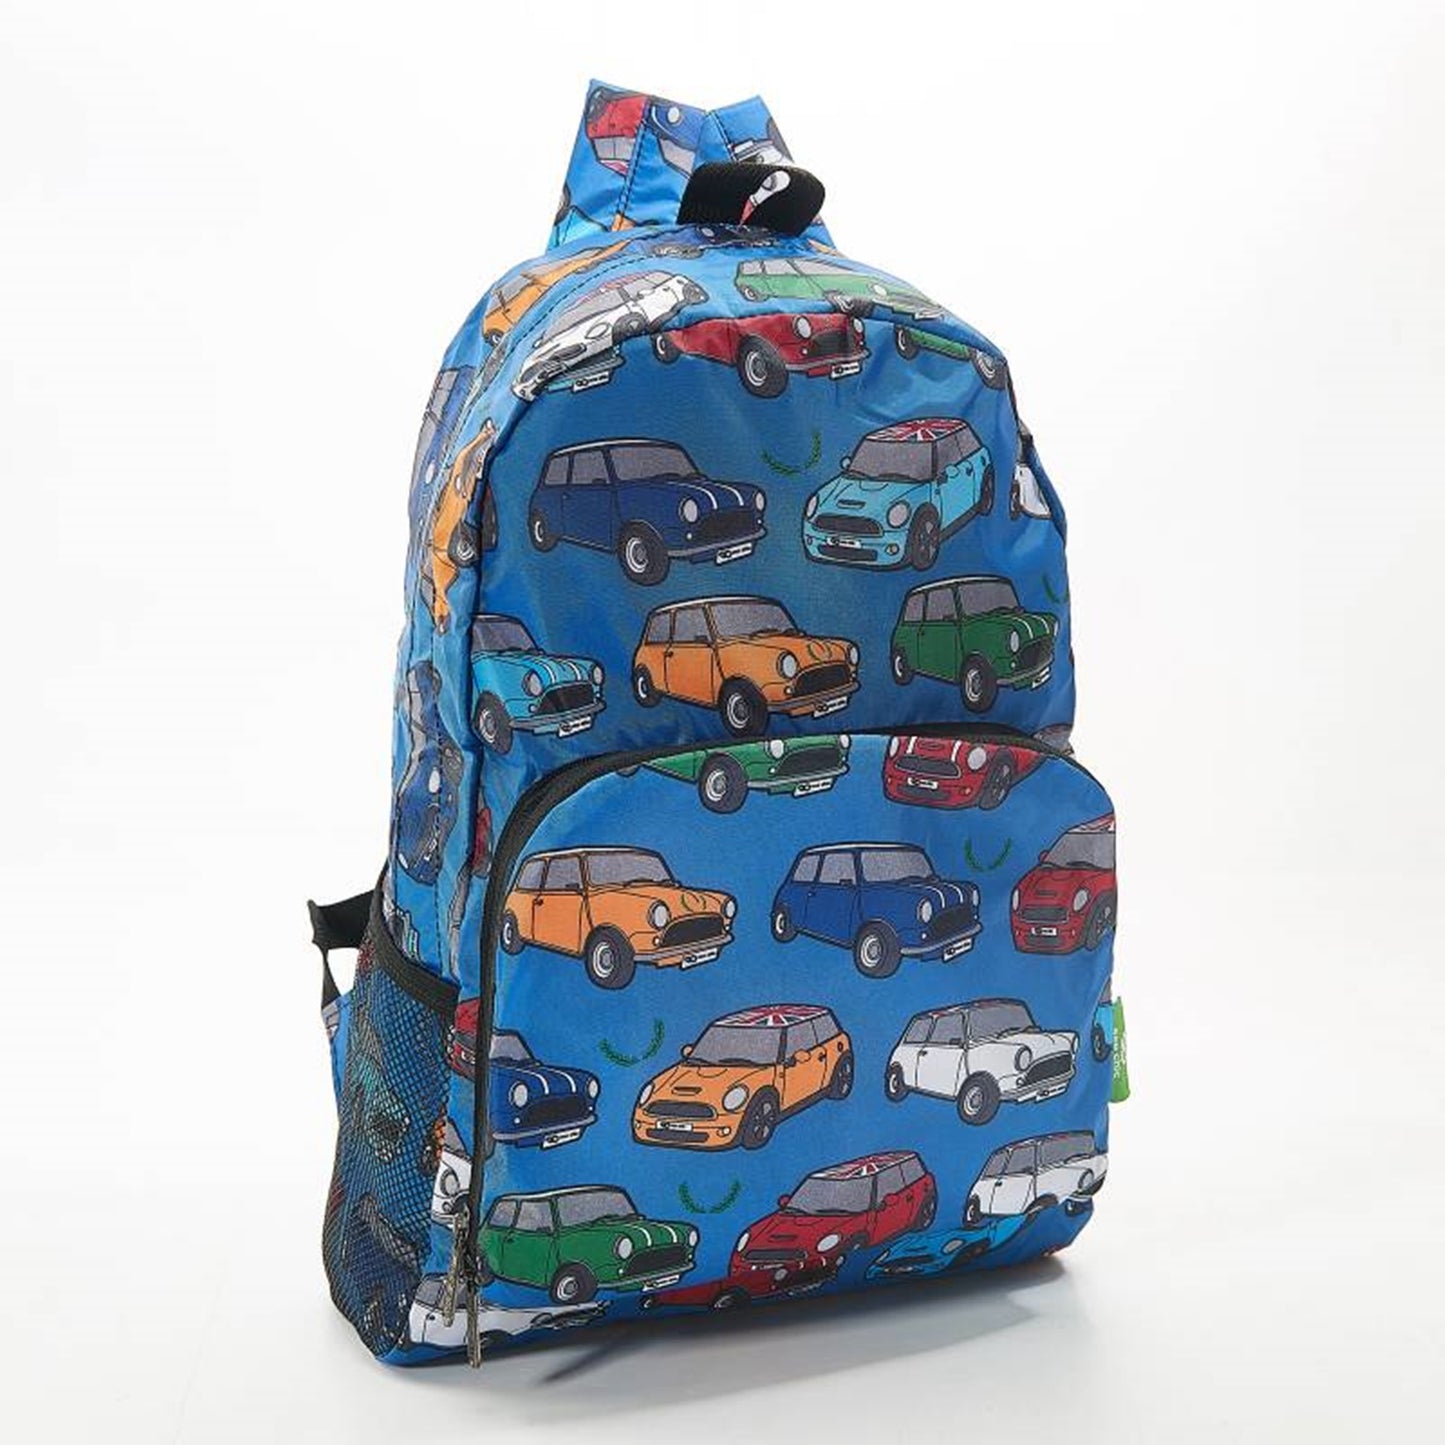 ECO CHIC Foldaway Back Pack/School Bag/Shopping Bag - Made From Recycled Plastic Bottles - Mini Car (Blue)